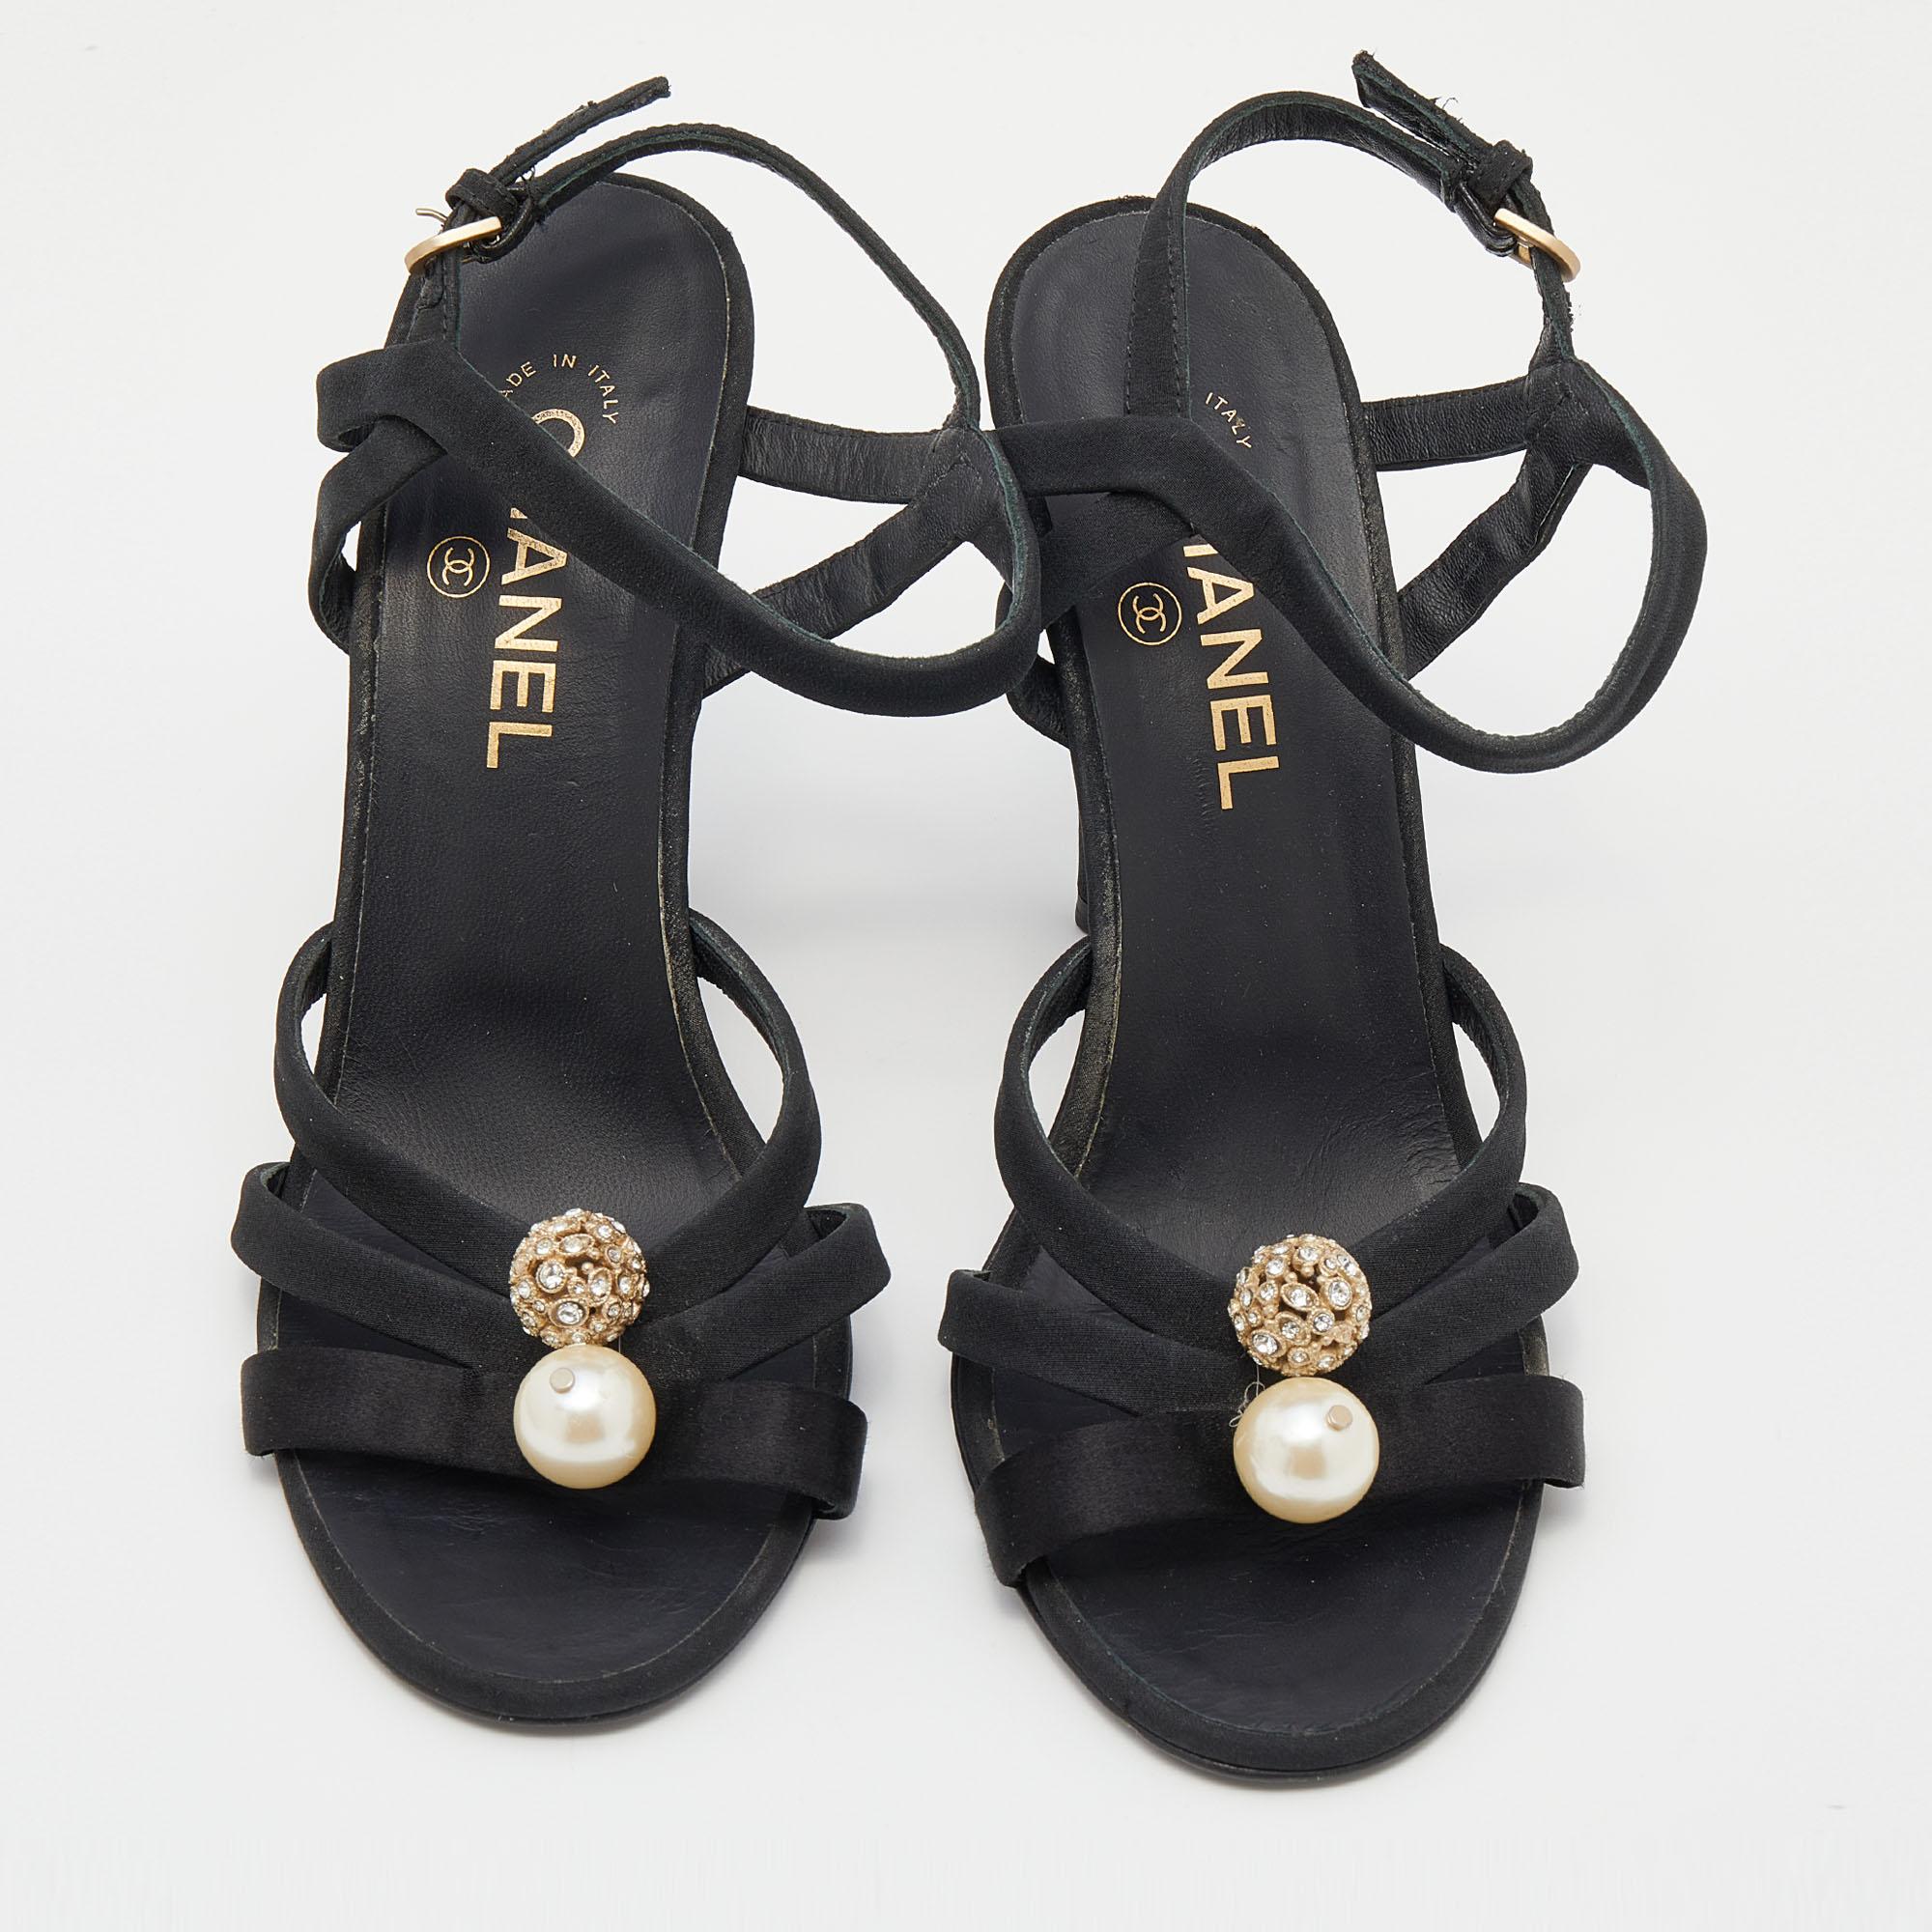 Women's Chanel Black Satin And Fabric Embellished Strappy Sandals Size 39.5